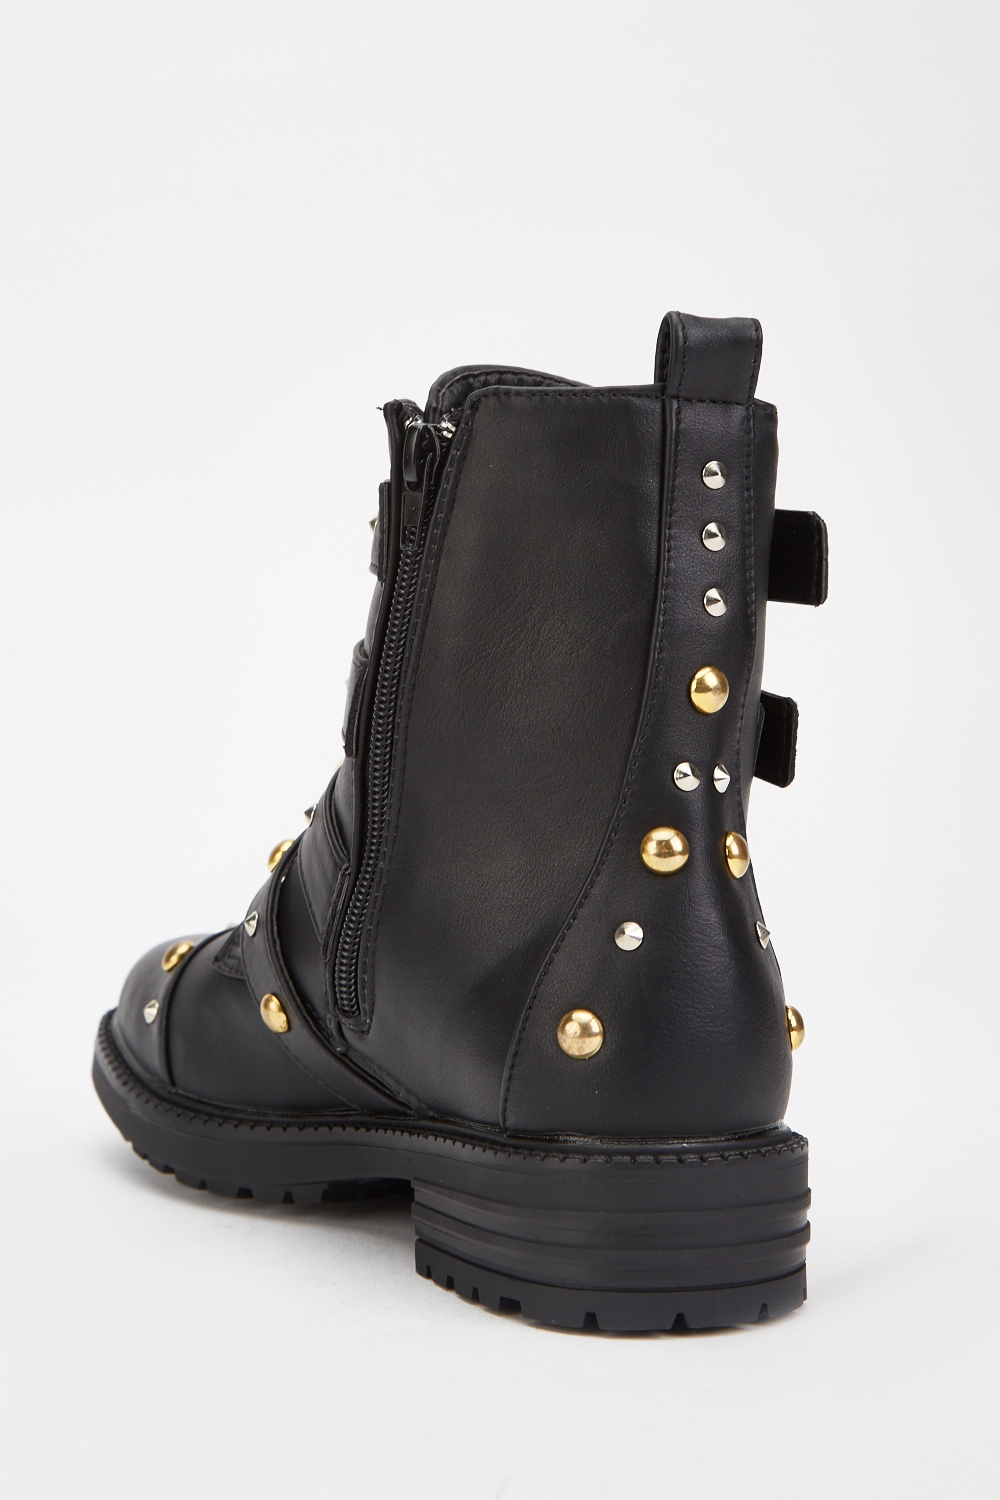 Multi Studded Buckled Ankle Boots - Just $7